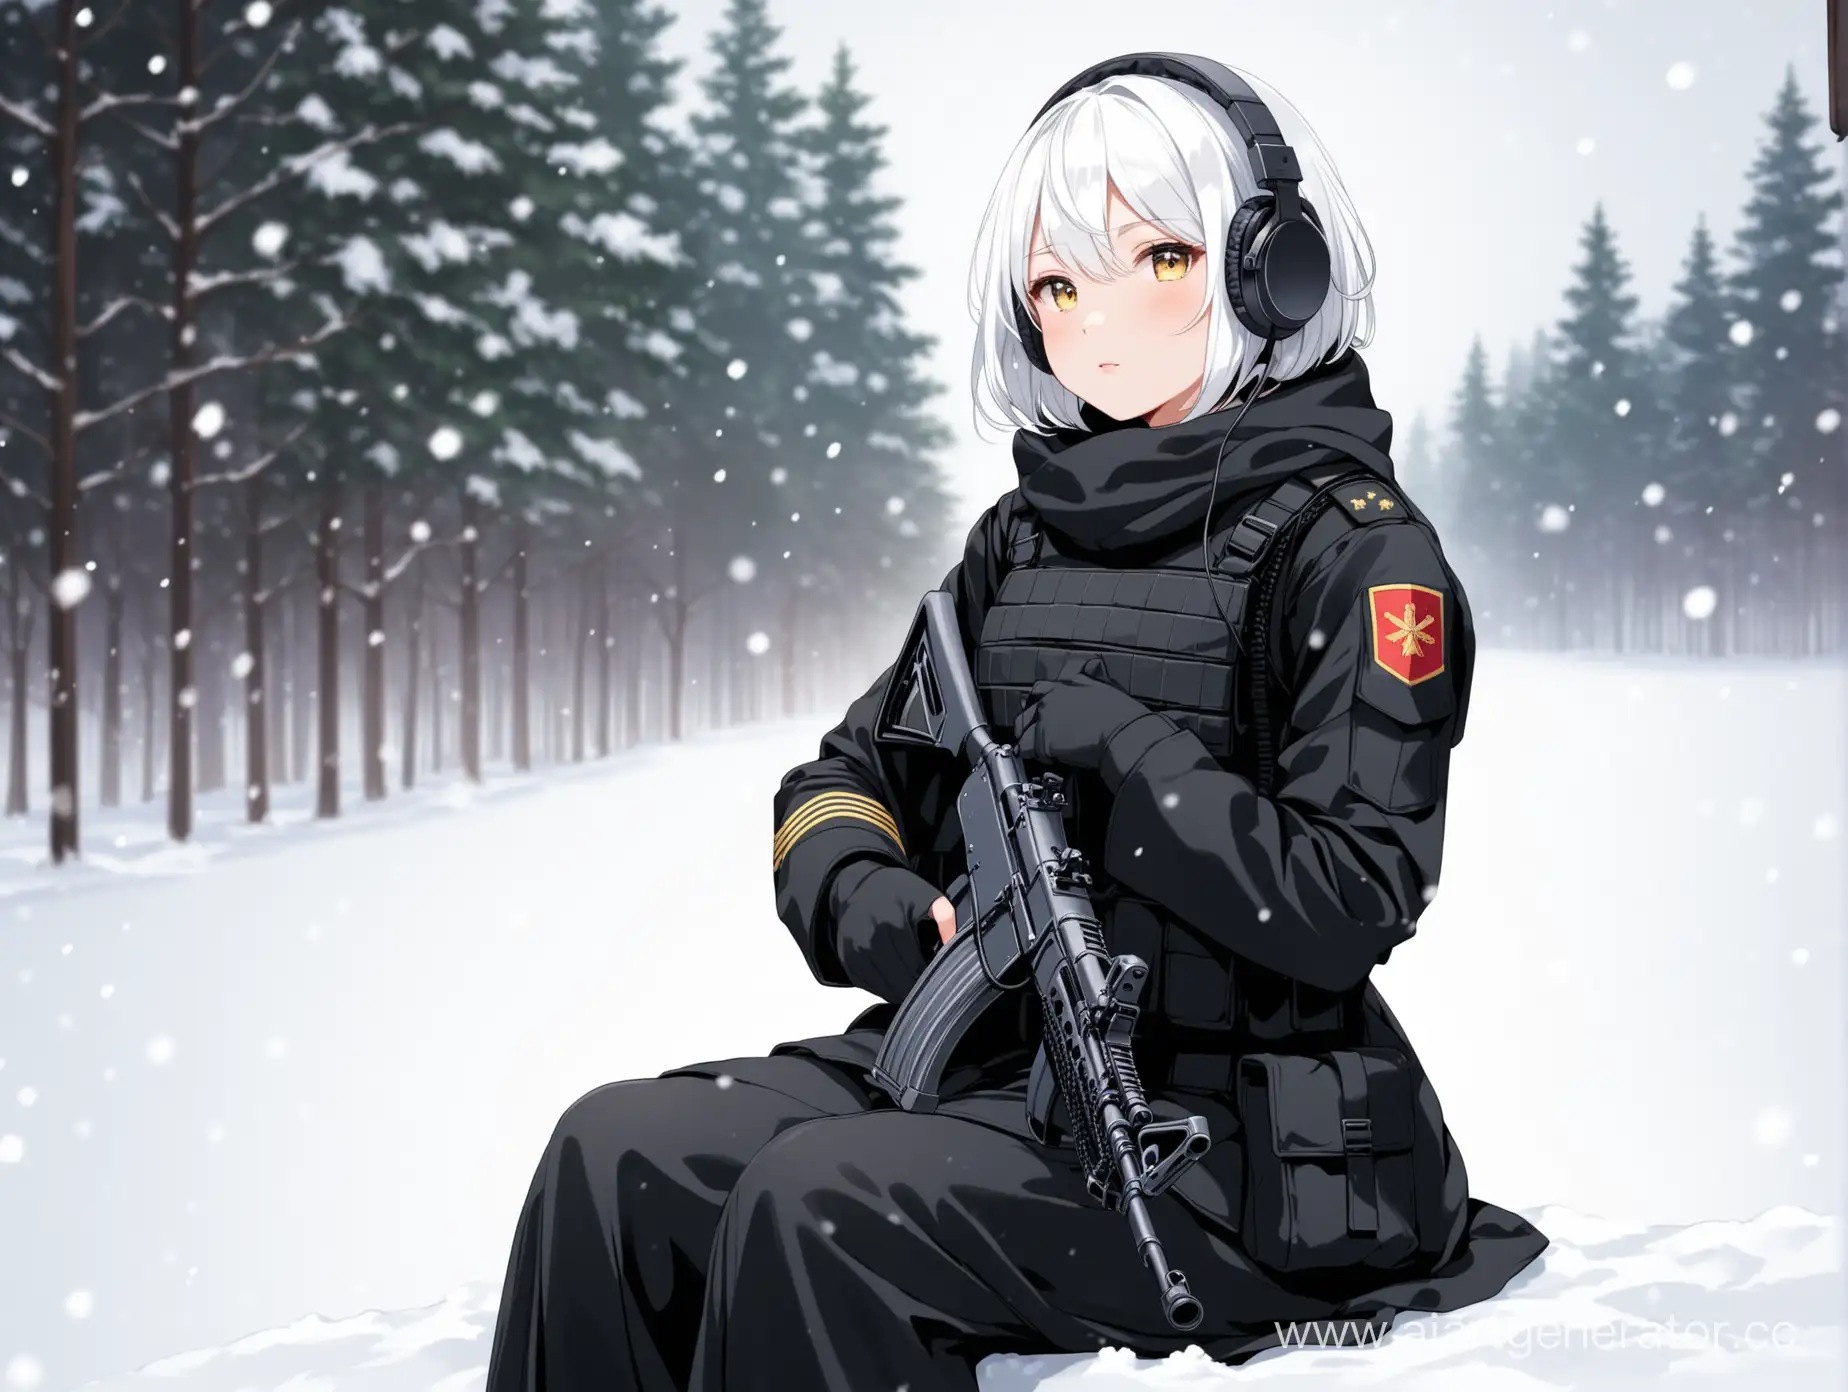 WhiteHaired-Girl-in-Military-Uniform-with-AK47-in-Snow